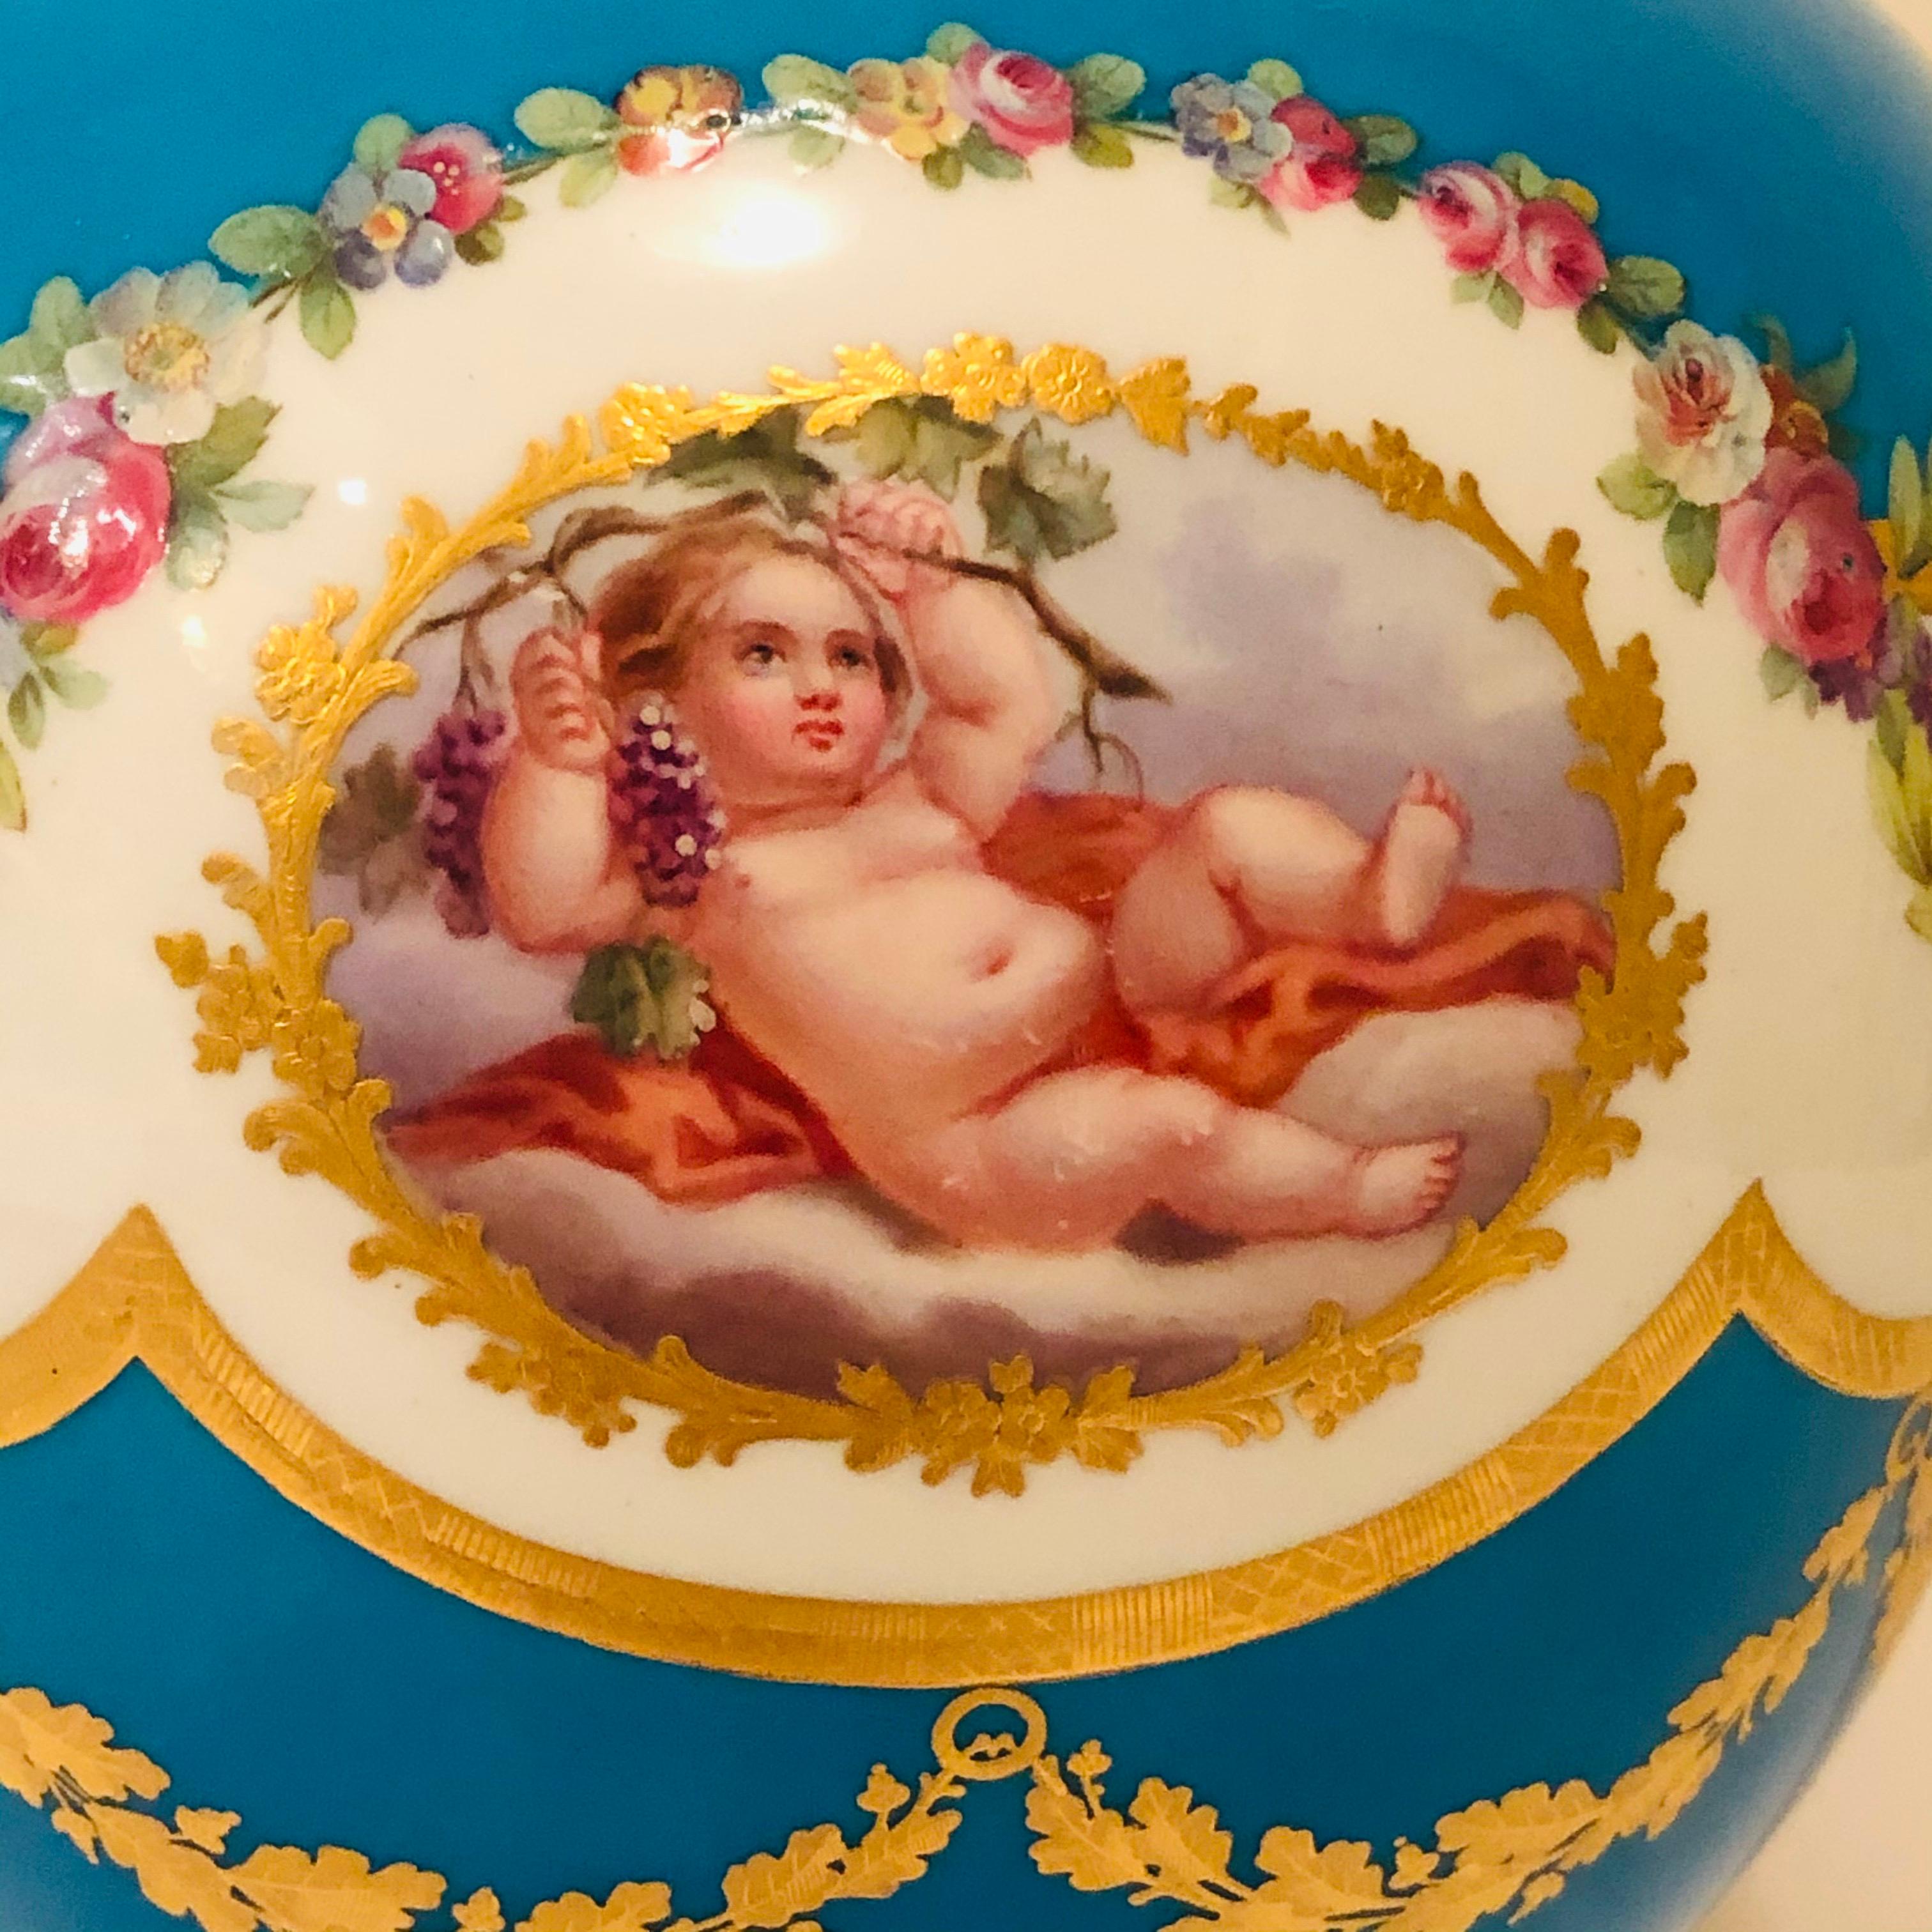 Romantic Celeste Blue Minton Urn Painted with Cherubs and Flowers in the Style of Sèvres